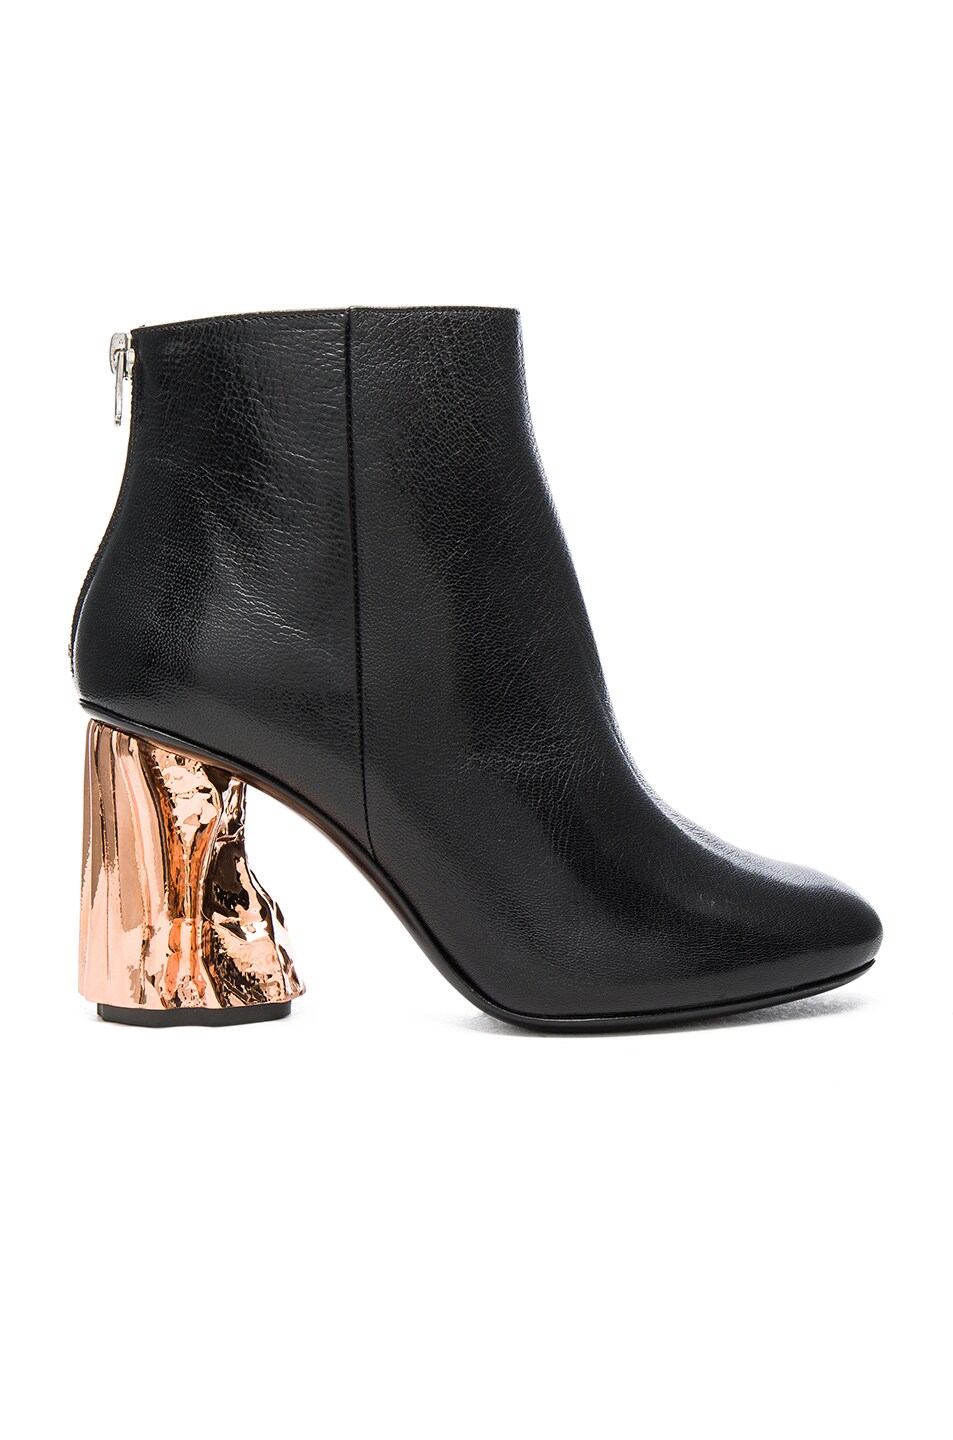 Image 1 of Acne Studios Ora Palm Leather Booties in Black & Copper